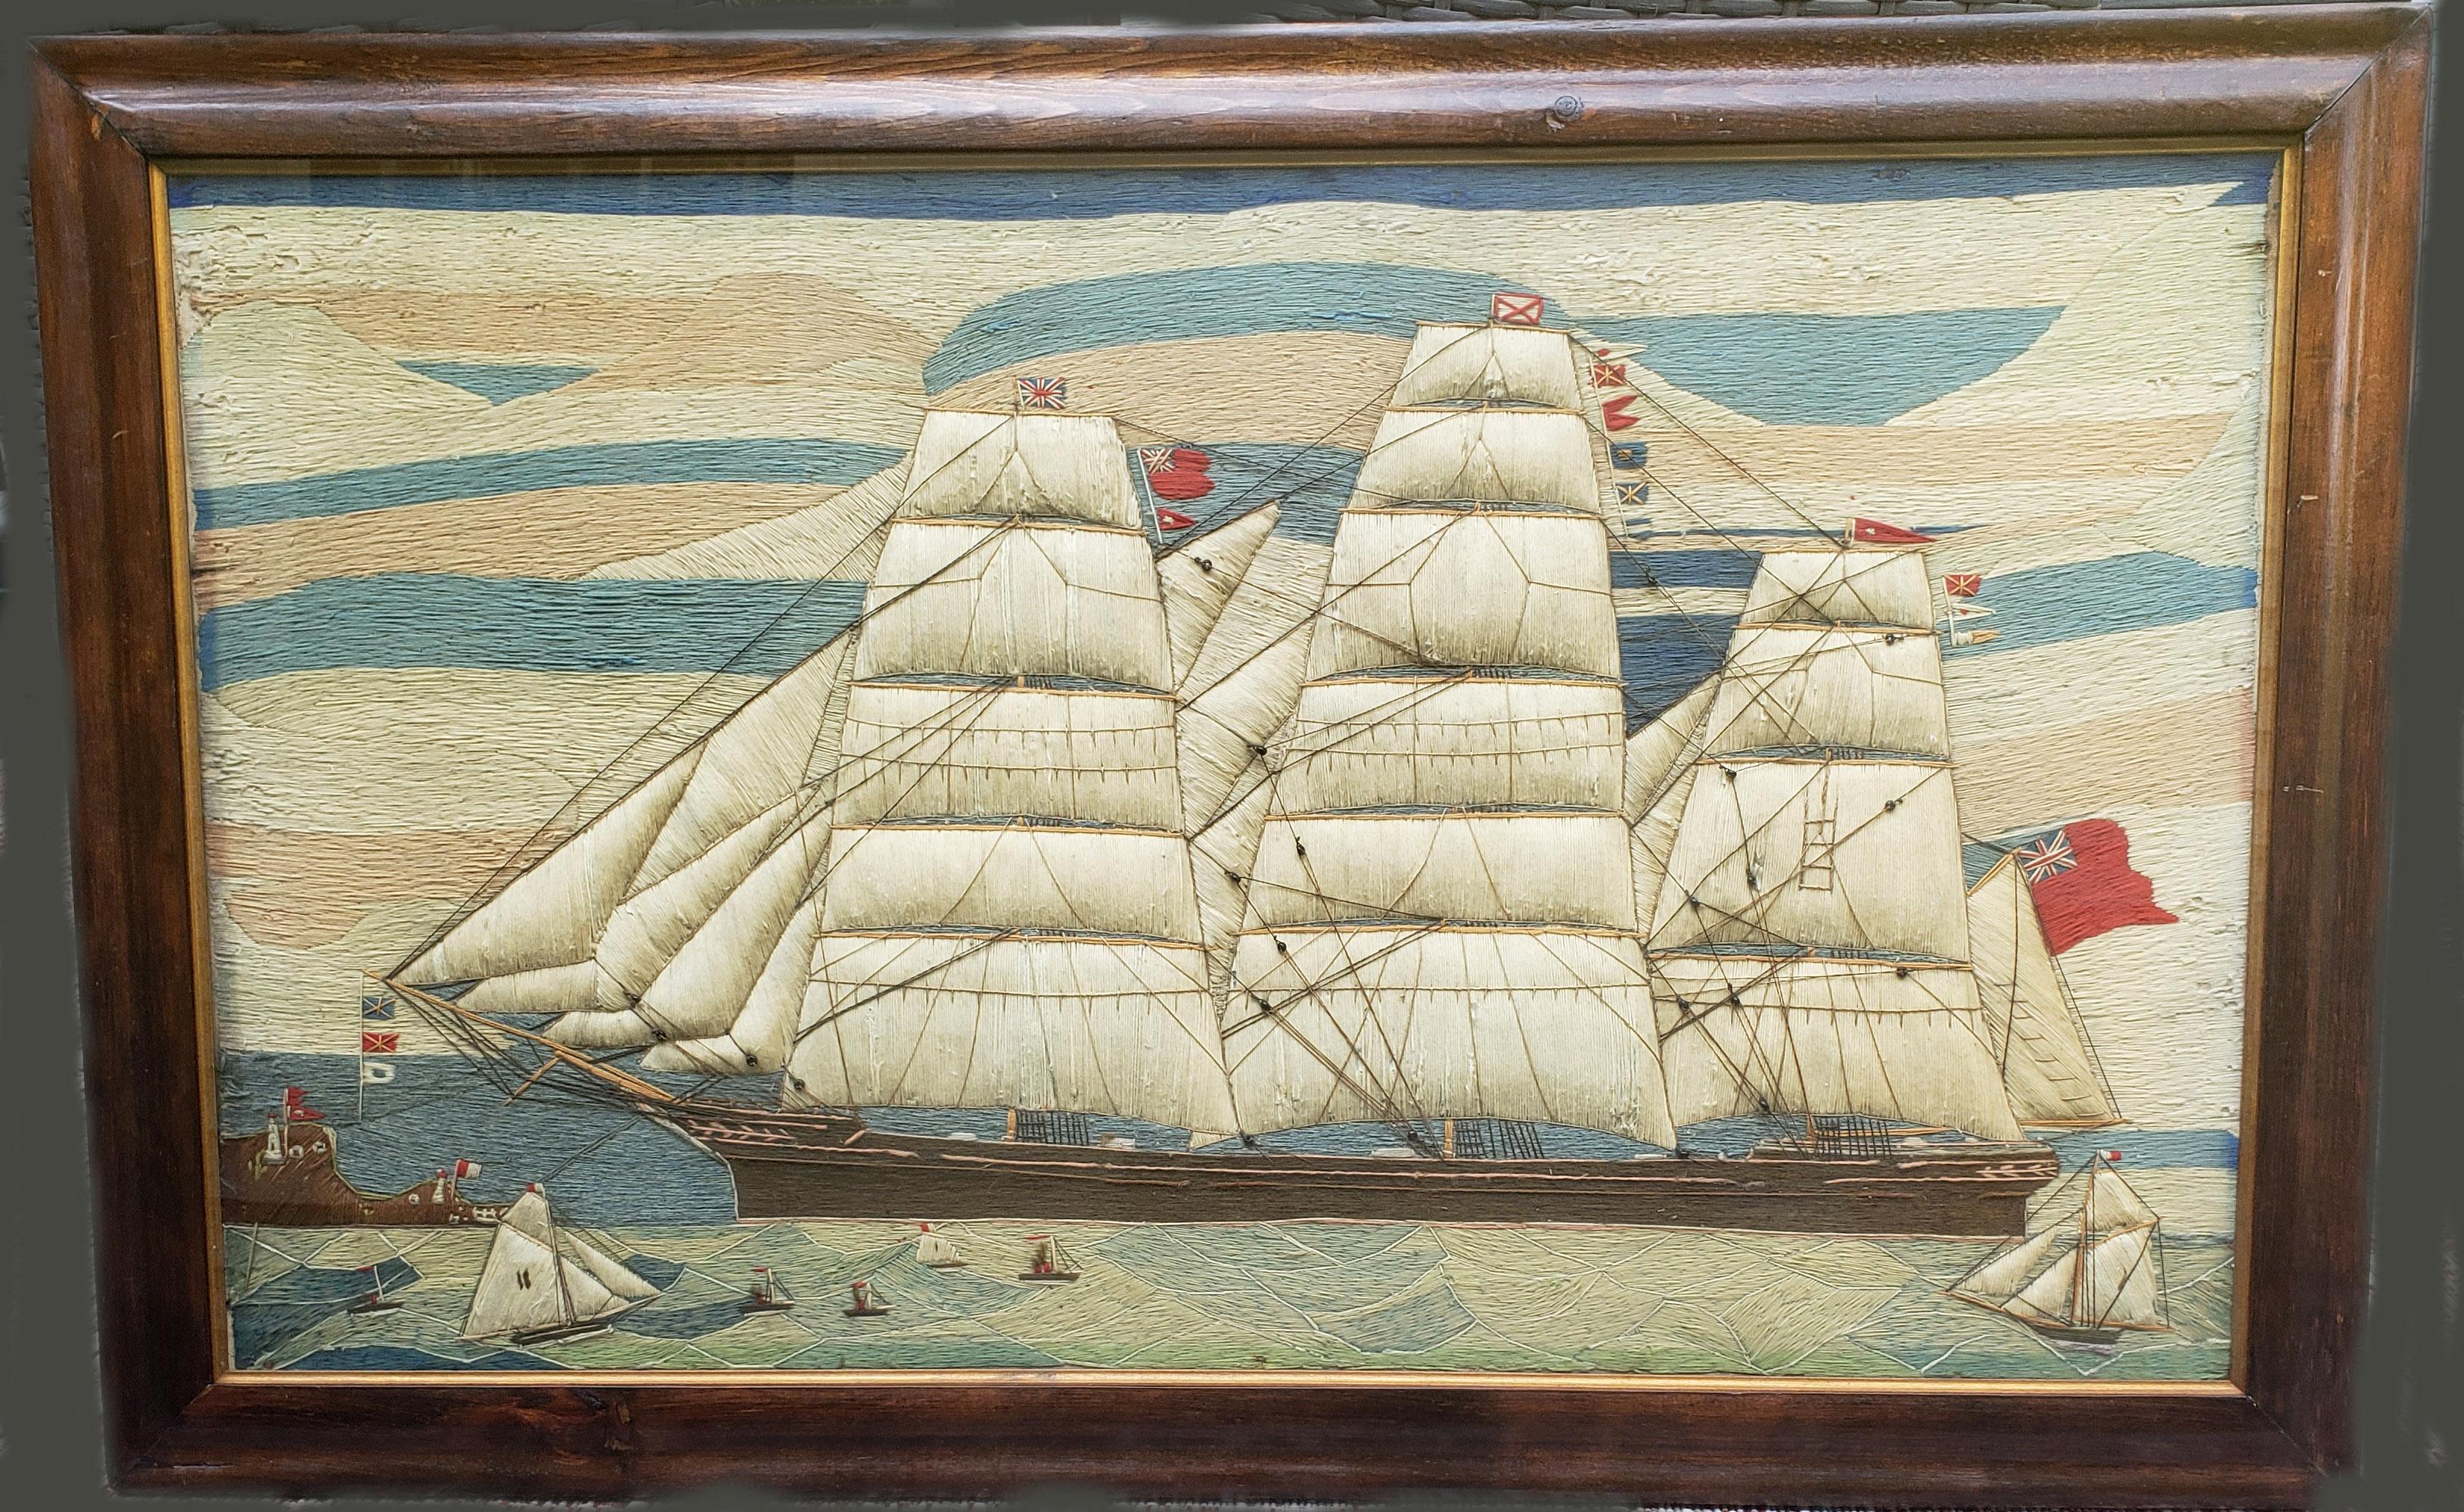 Massive sailor's woolwork of a British Merchant Navy clipper ship coming into port,
circa 1870
(NY9390-Urrr)

The massive sailor's woolwork or woolie depicts a fully-rigged three-masted Merchant Navy Clipper passing a signal station coming into